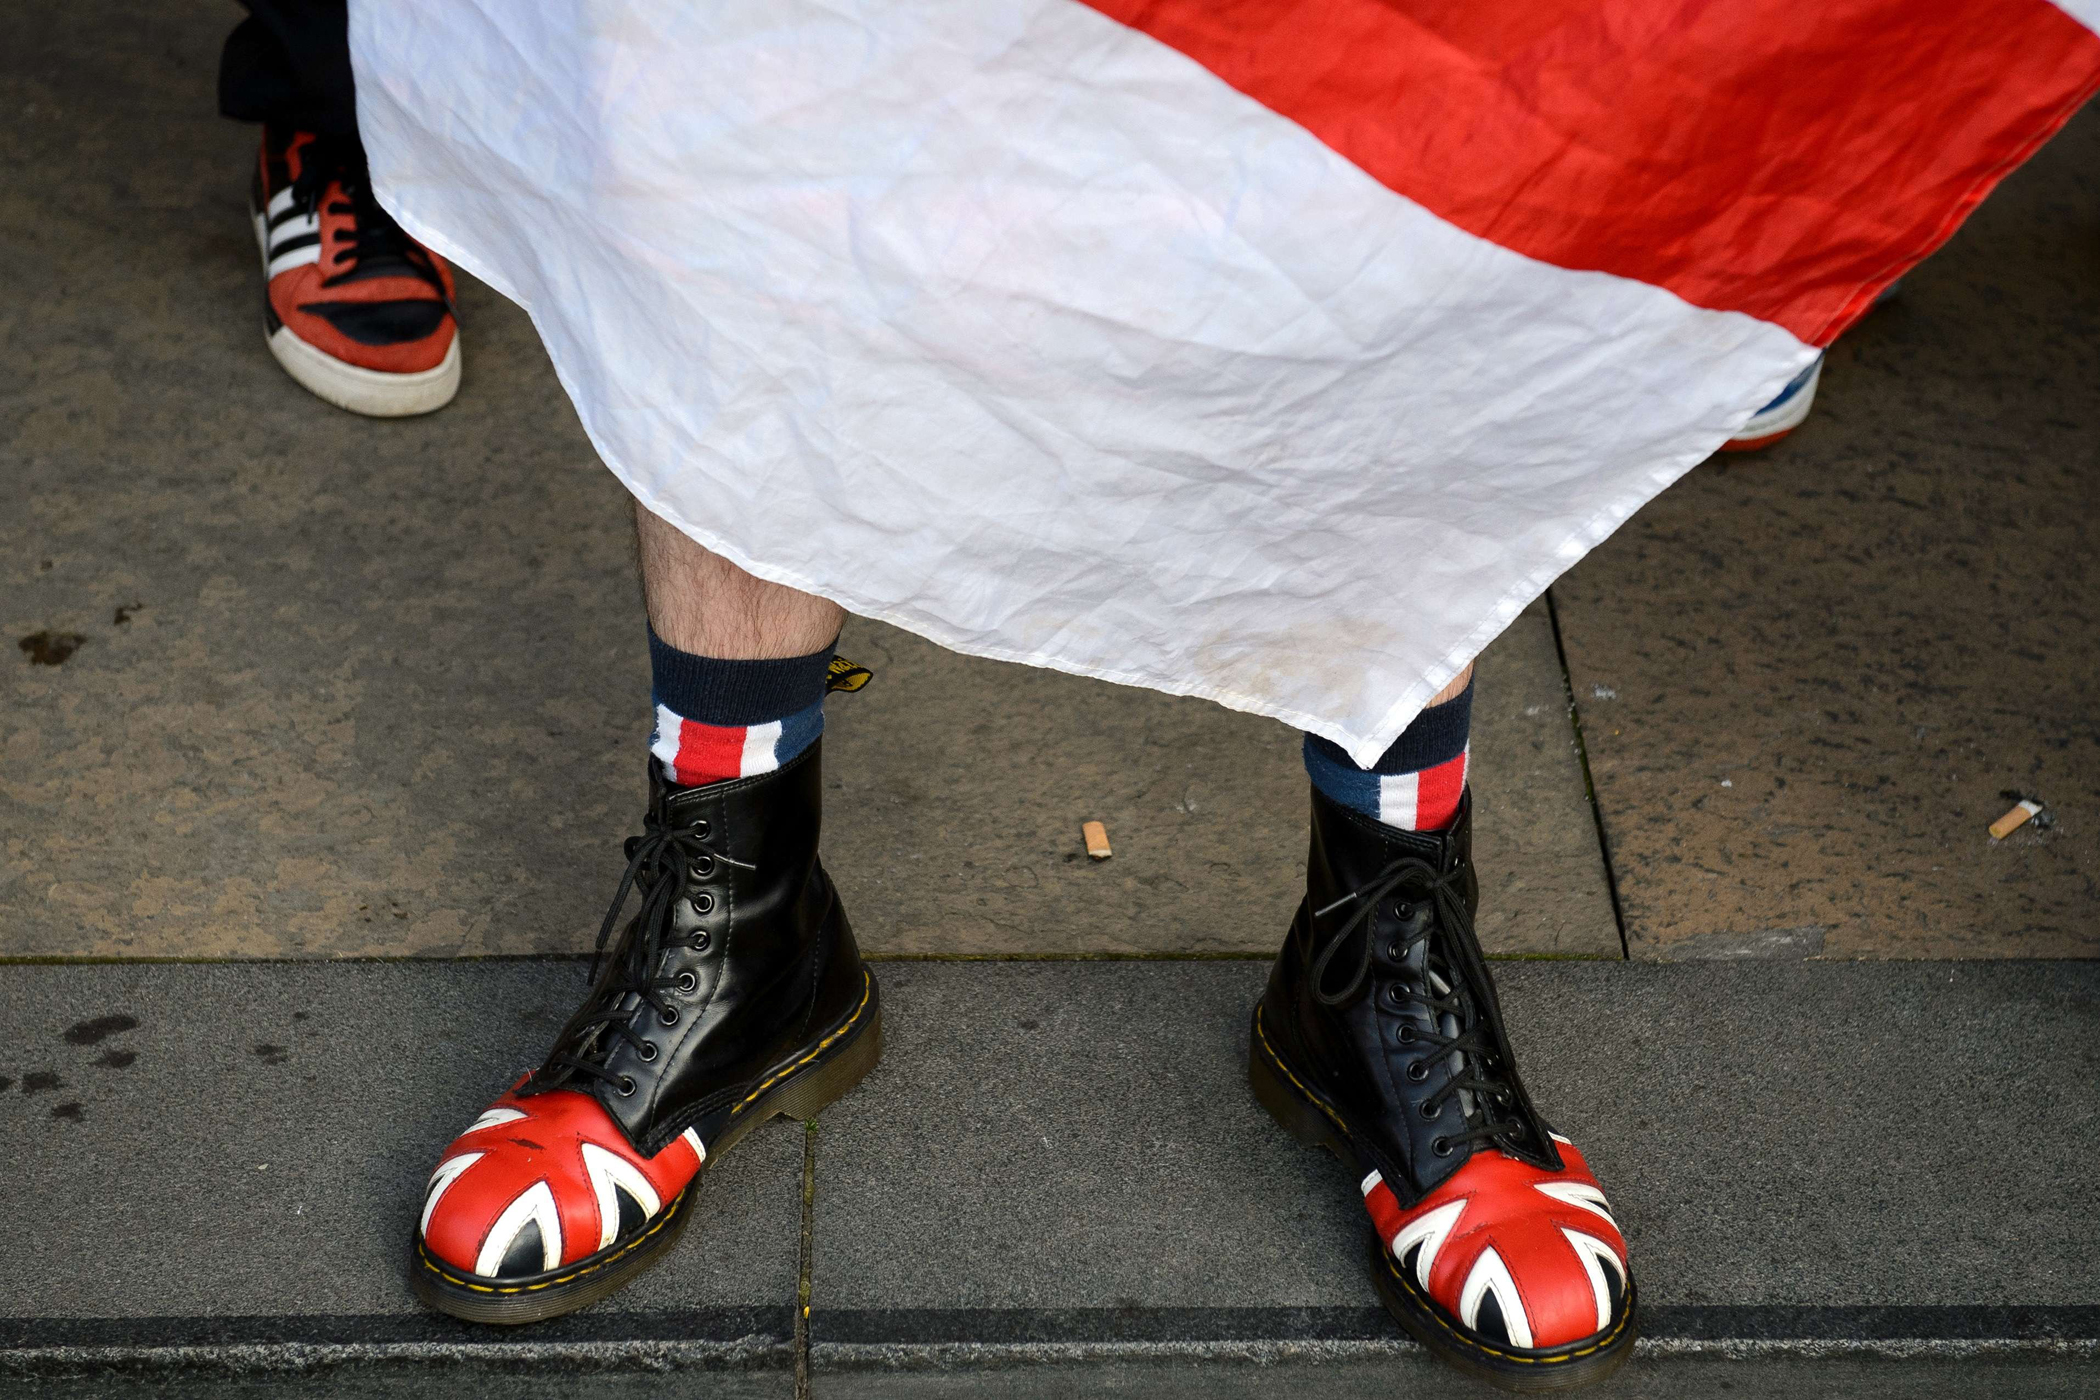 An anti-independence activist wearing shoes bearing the Union flag rallies opposite pro-independence supporters in Glasgow's George Square, in Scotland, on Sept. 17, 2014, on the eve of Scotland's independence referendum.